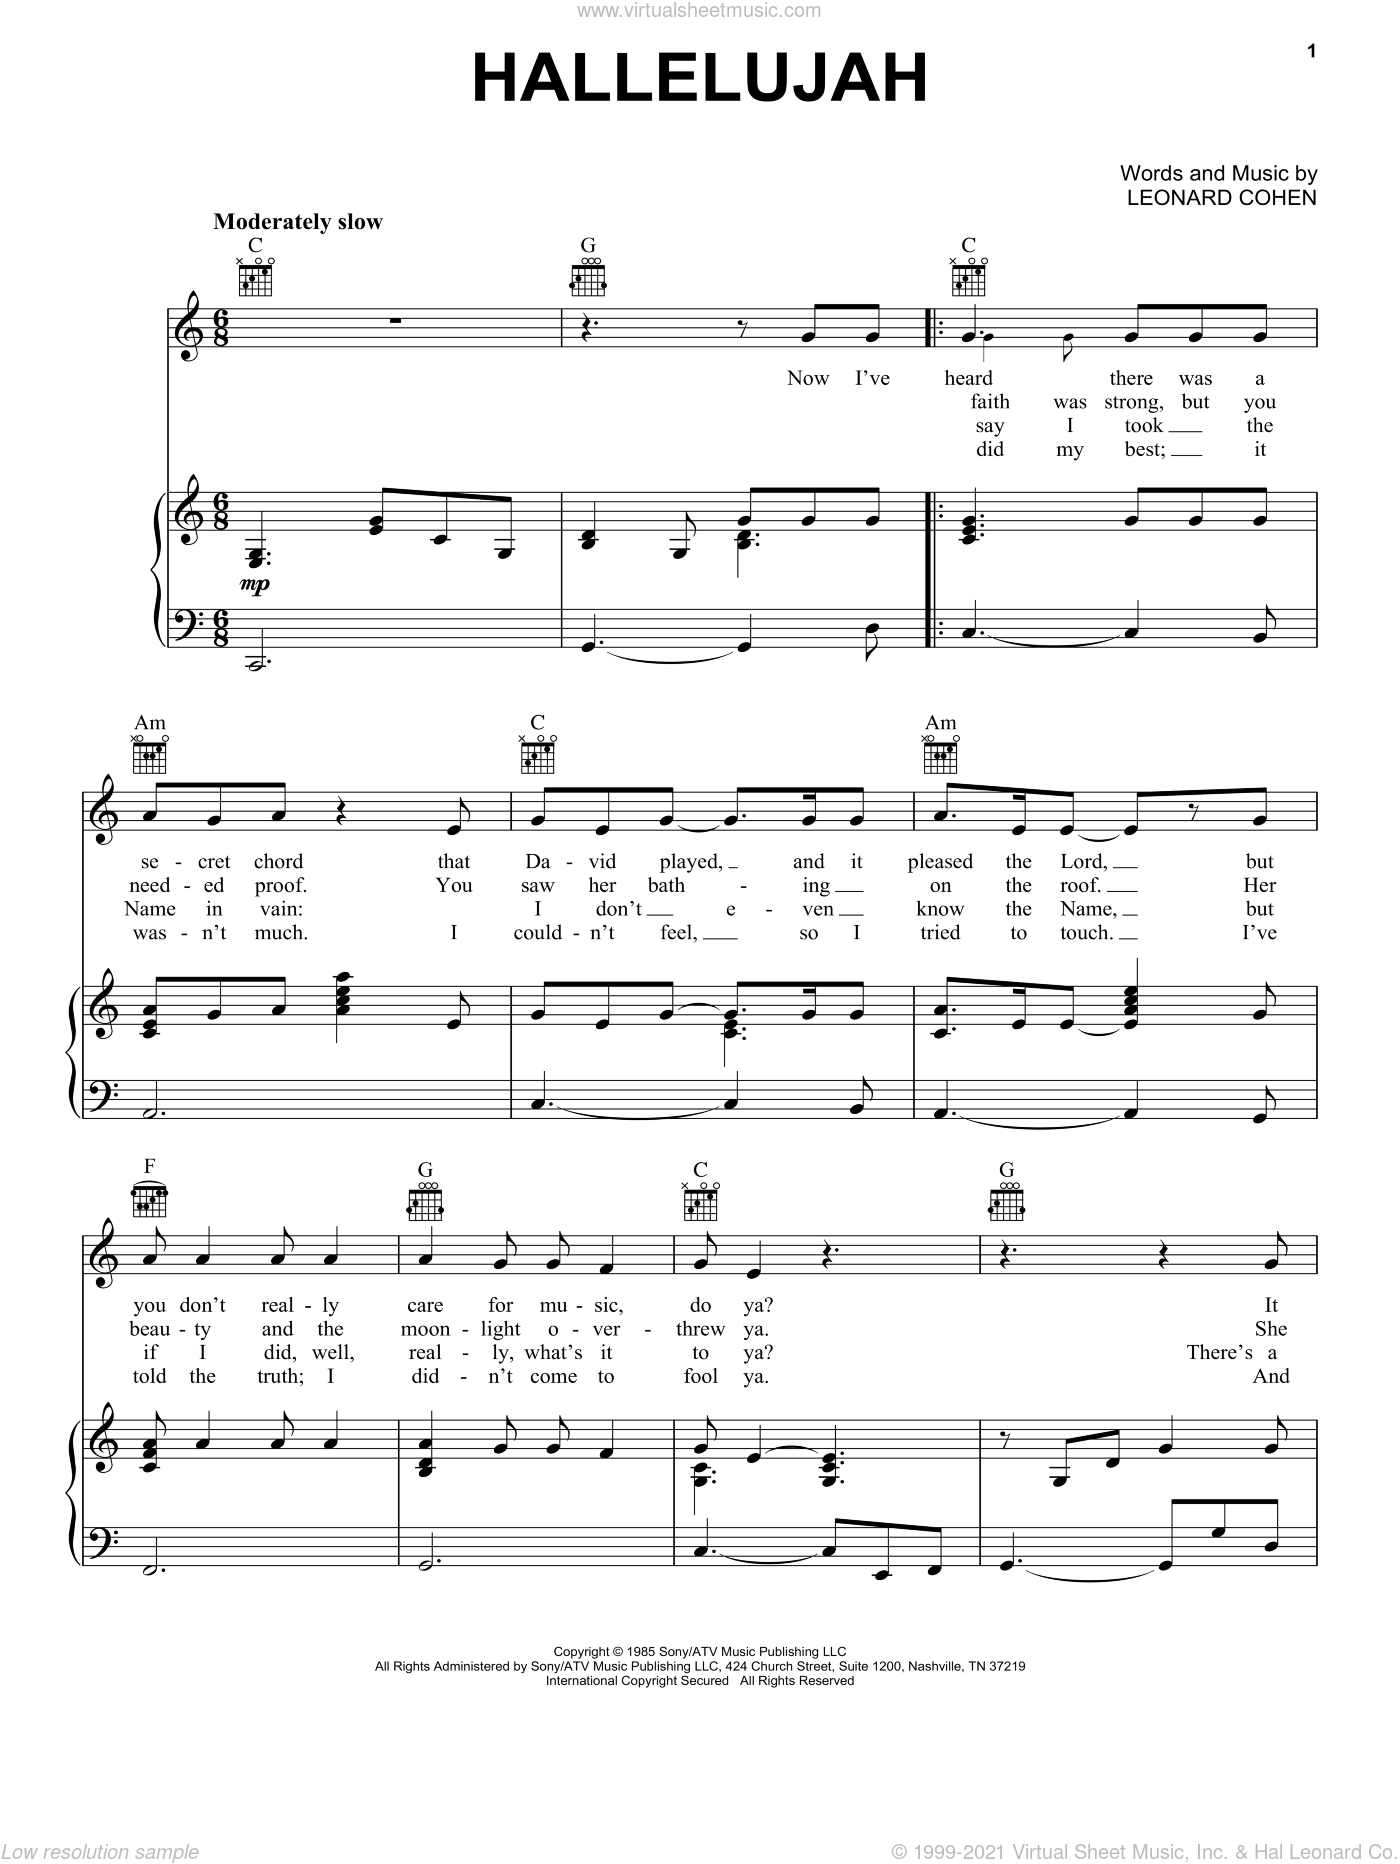 Free Printable Piano Sheet Music For Hallelujah By Leonard Cohen 